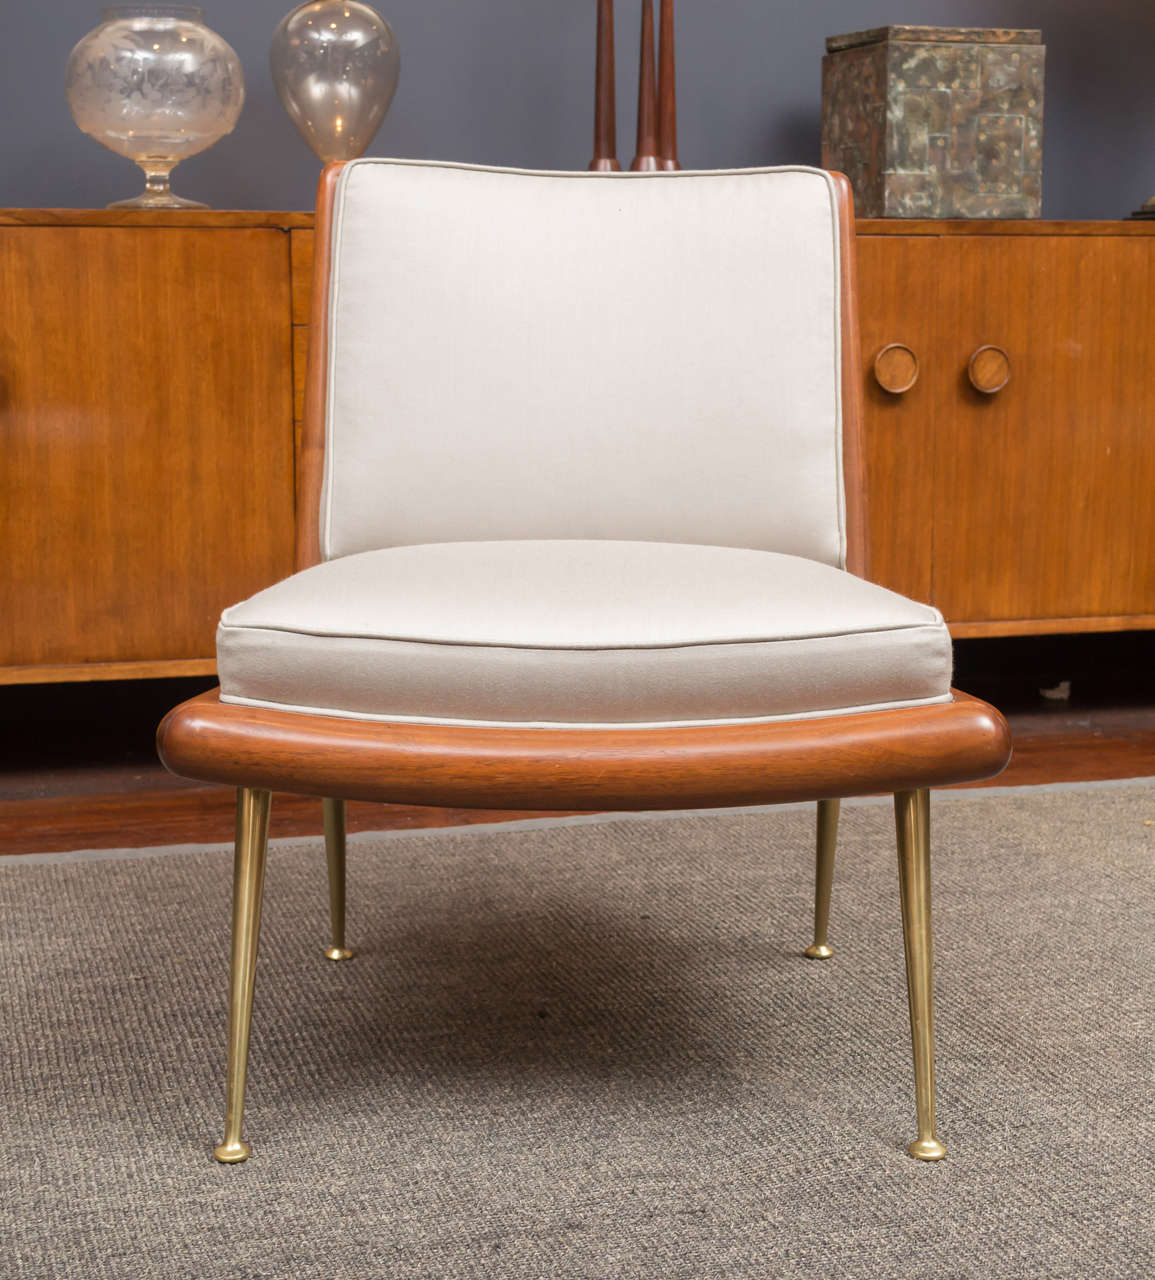 Elegant and refined lounge chair designed by T.H. Robsjohn-Gibbings for Widdicomb Furniture Co. 
Sculpted solid walnut frame supported on tapering brass legs with new upholstery.